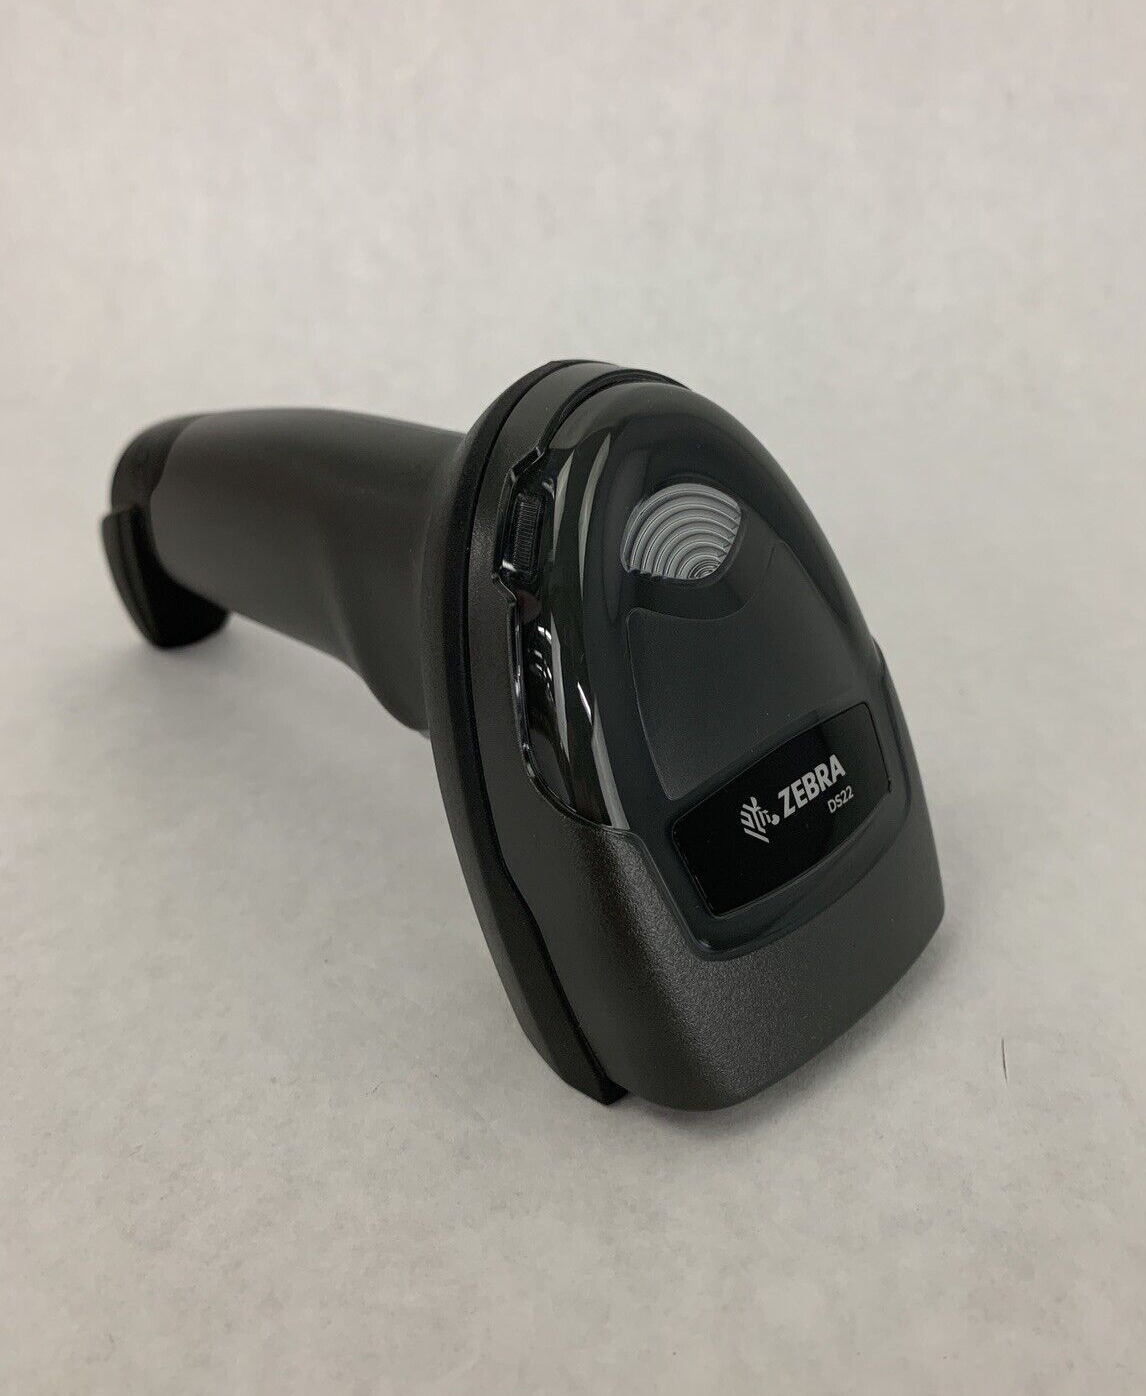 Zebra DS2208-SR00007ZZWW USB Barcode Scanner No Cable Tested